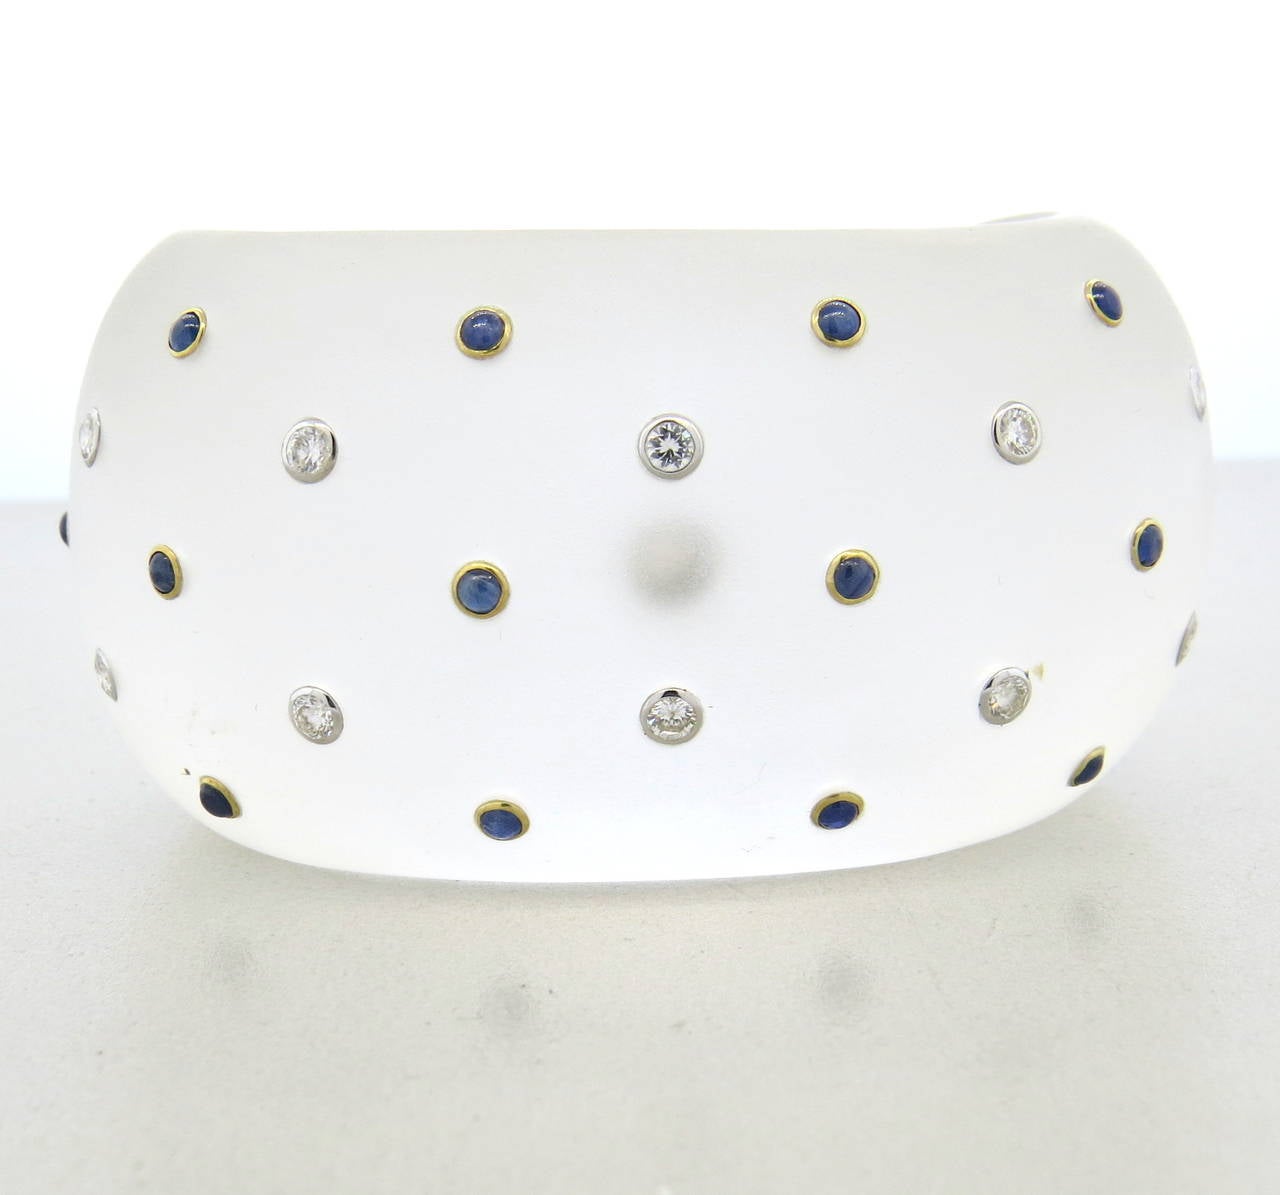 Trianon wide cuff bracelet in frosted crystal, decorated with diamonds and sapphires with 18k gold. Will fit up to 6